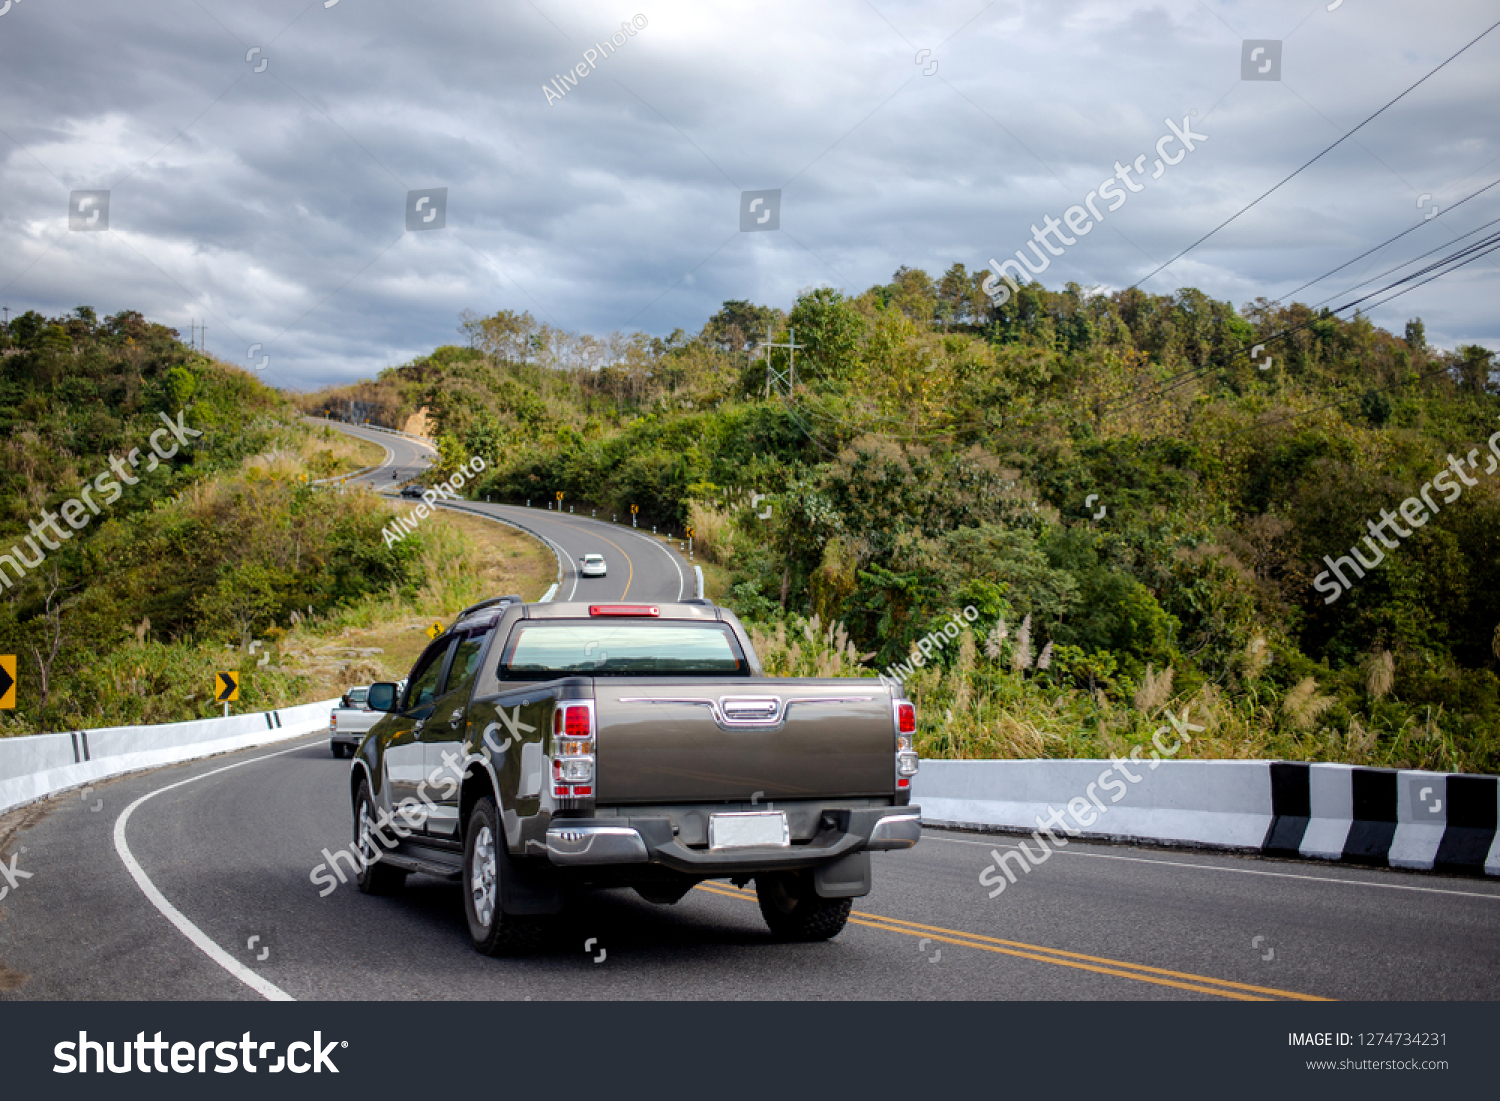 Cars running on the beautiful road along the mountain, Rear view of pickup truck on wavy road #1274734231